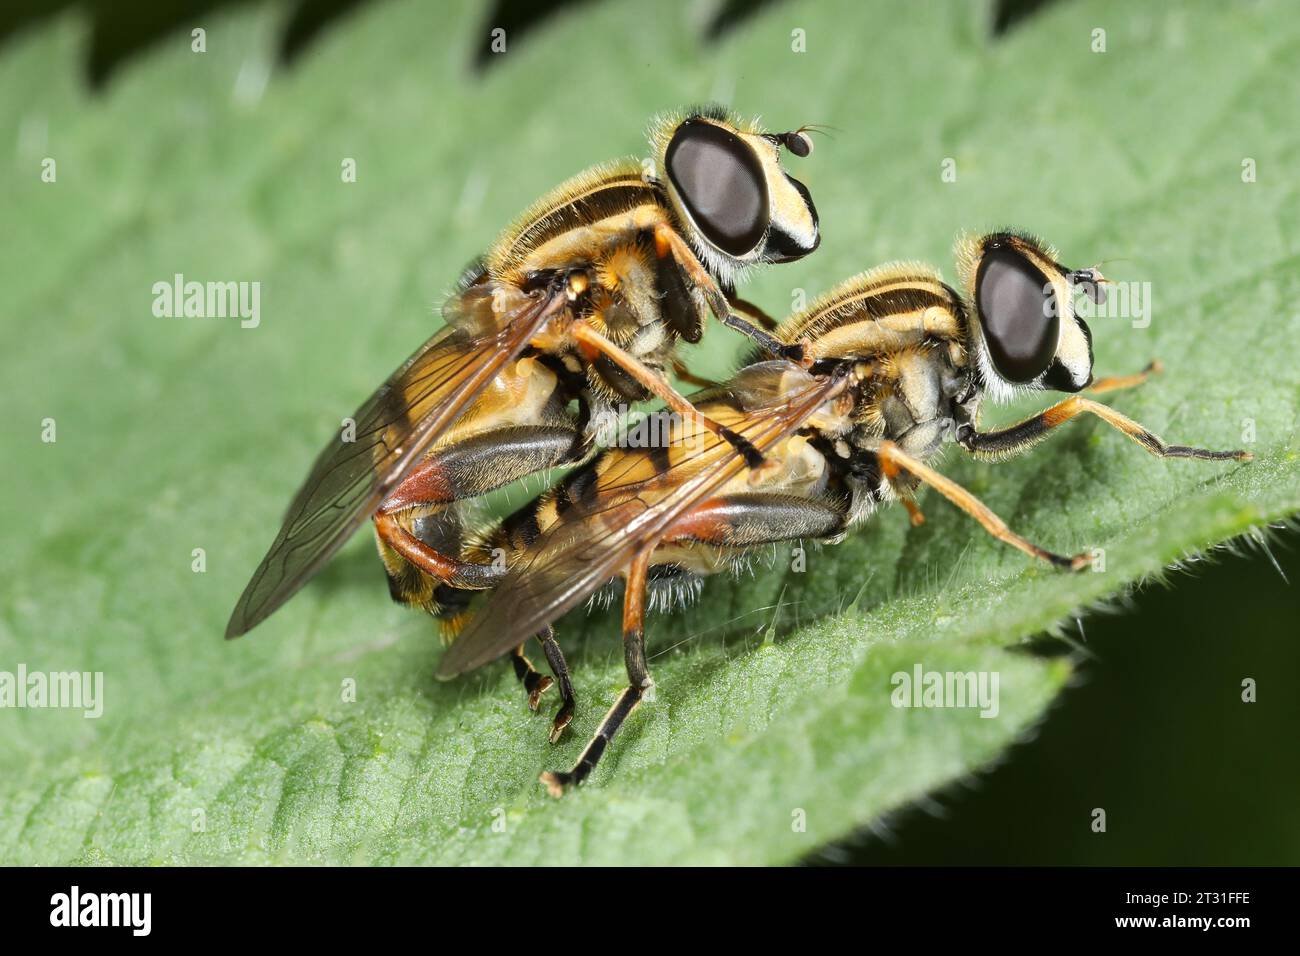 A pair of distinctively striped hoverflies mating perched on a leaf, Herefordshire, UK. Stock Photo